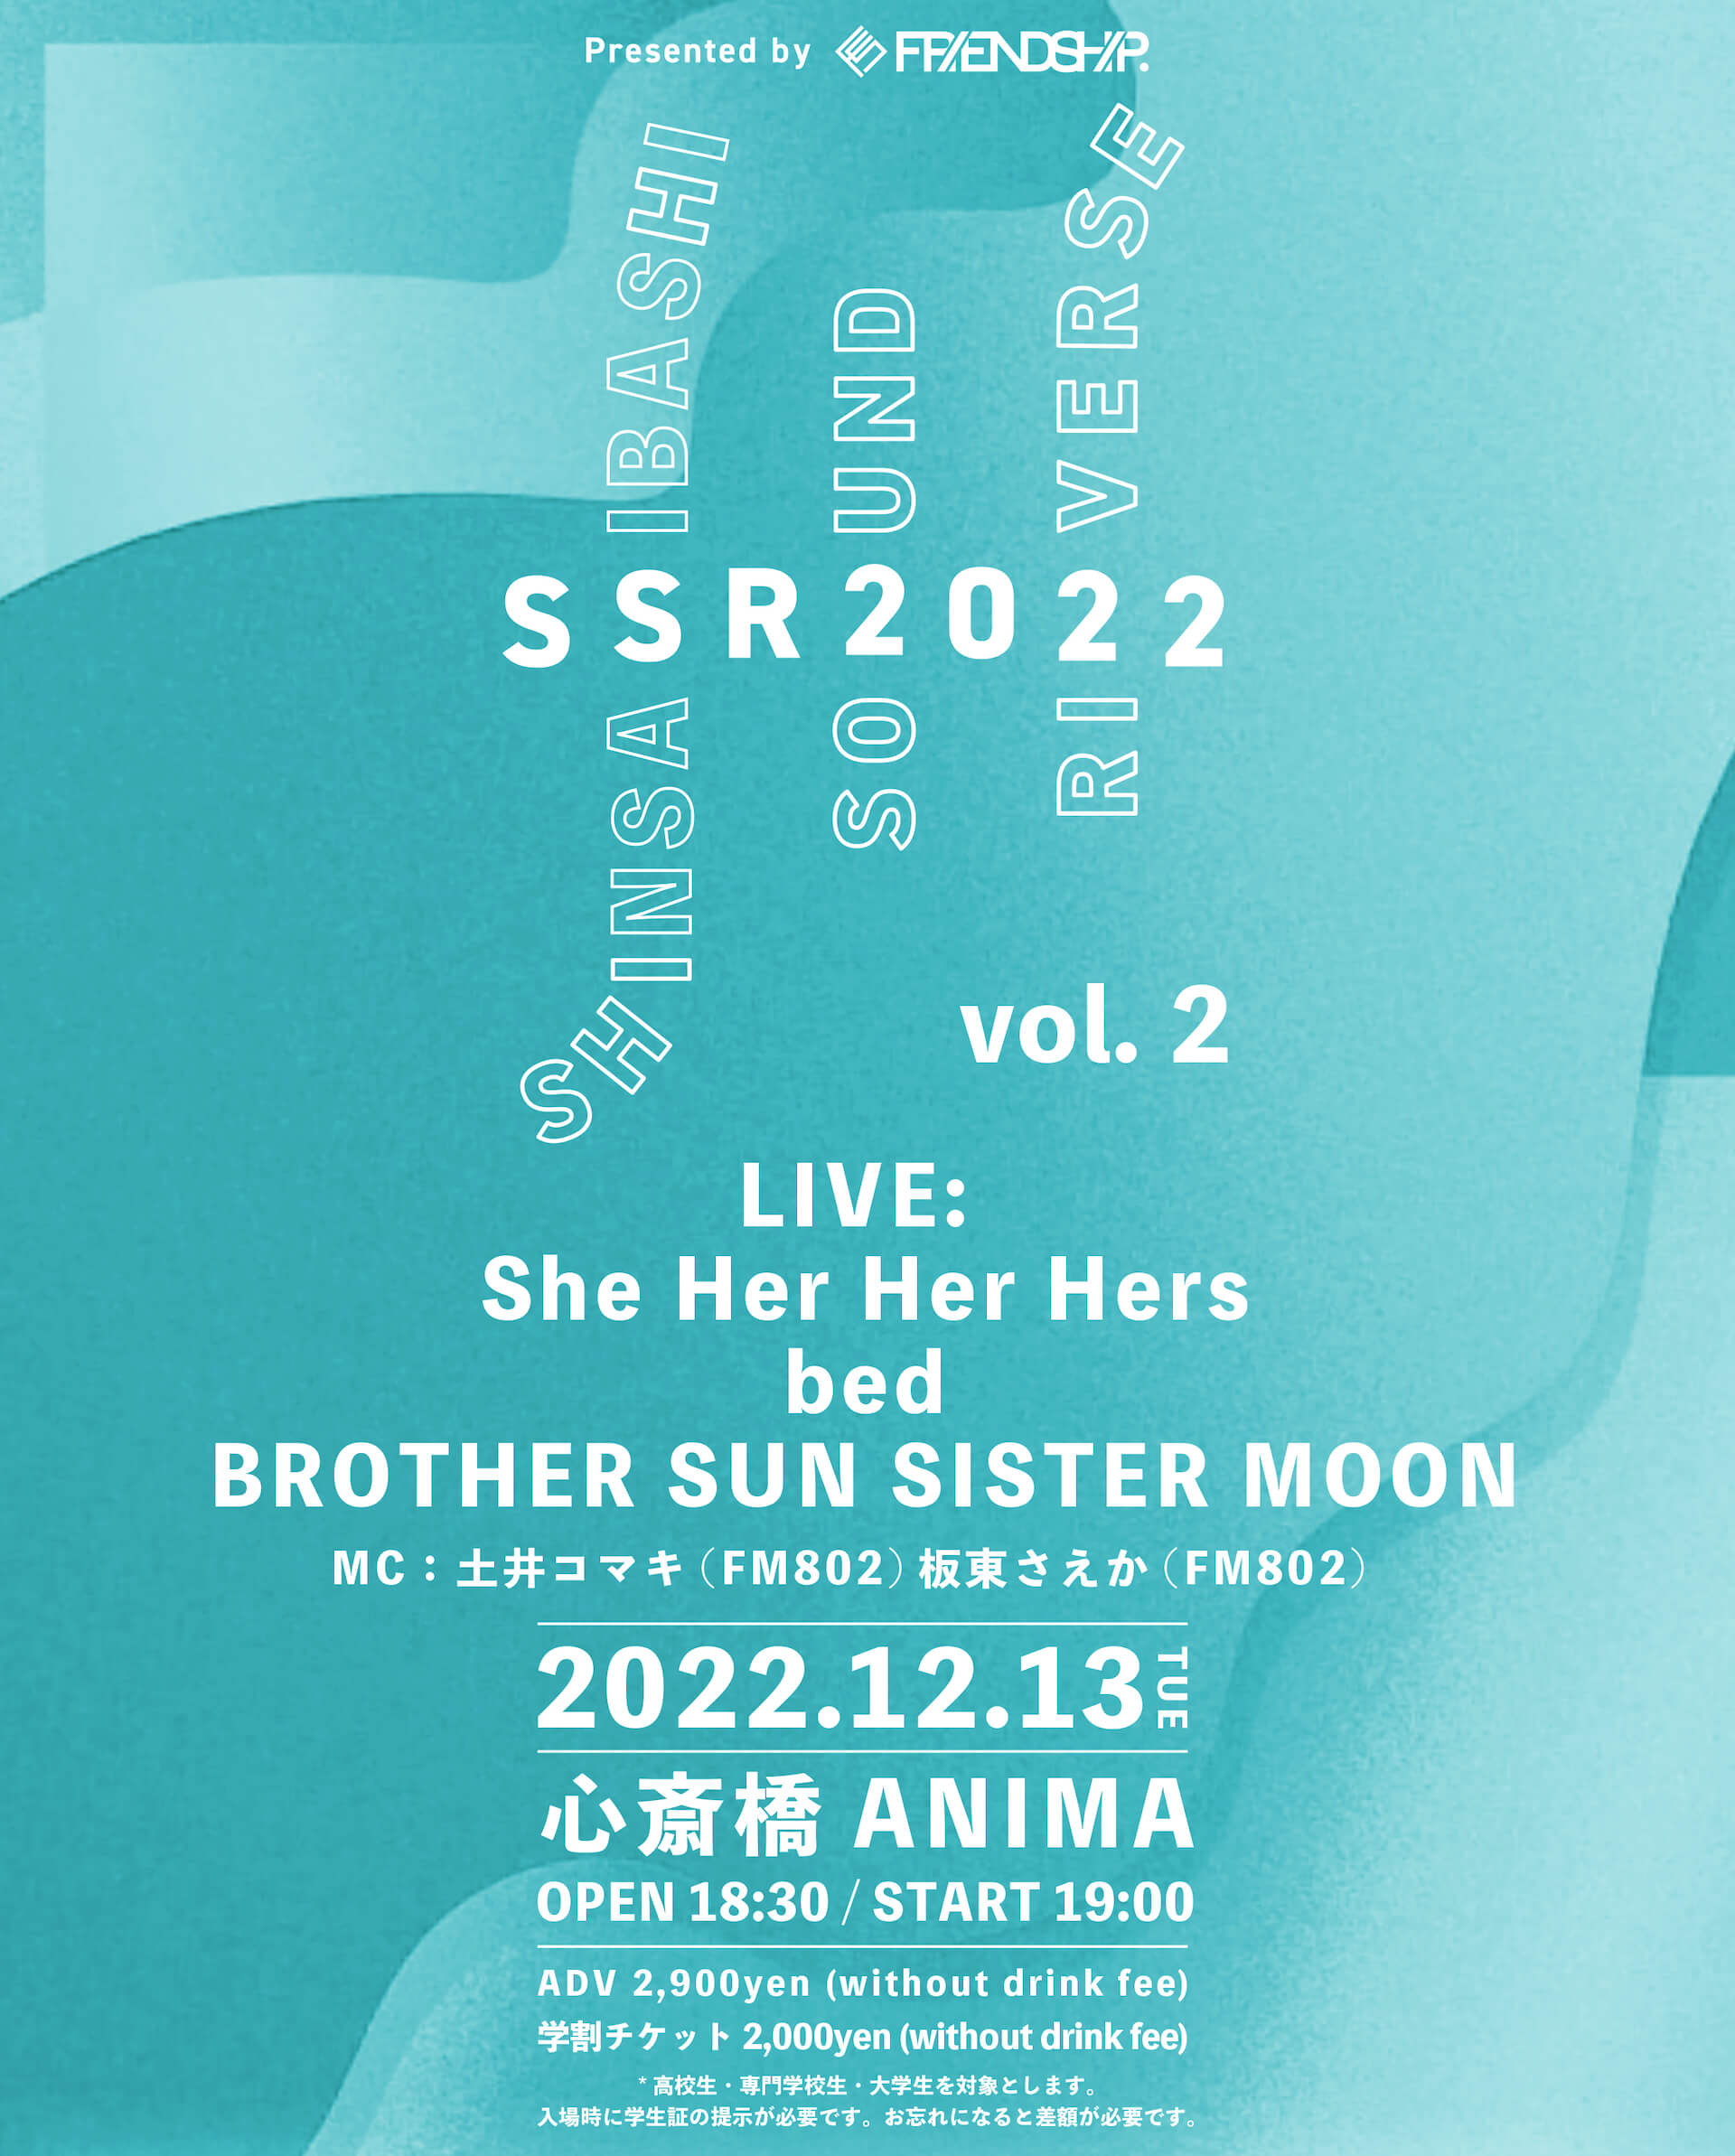 She Her Her Hers、bed、BROTHER SUN SISTER MOONが登場！FRIENDSHIP.とFM802による新しいサウンドを発信するイベント＜SSR＞第2回開催 music221108-ssr4